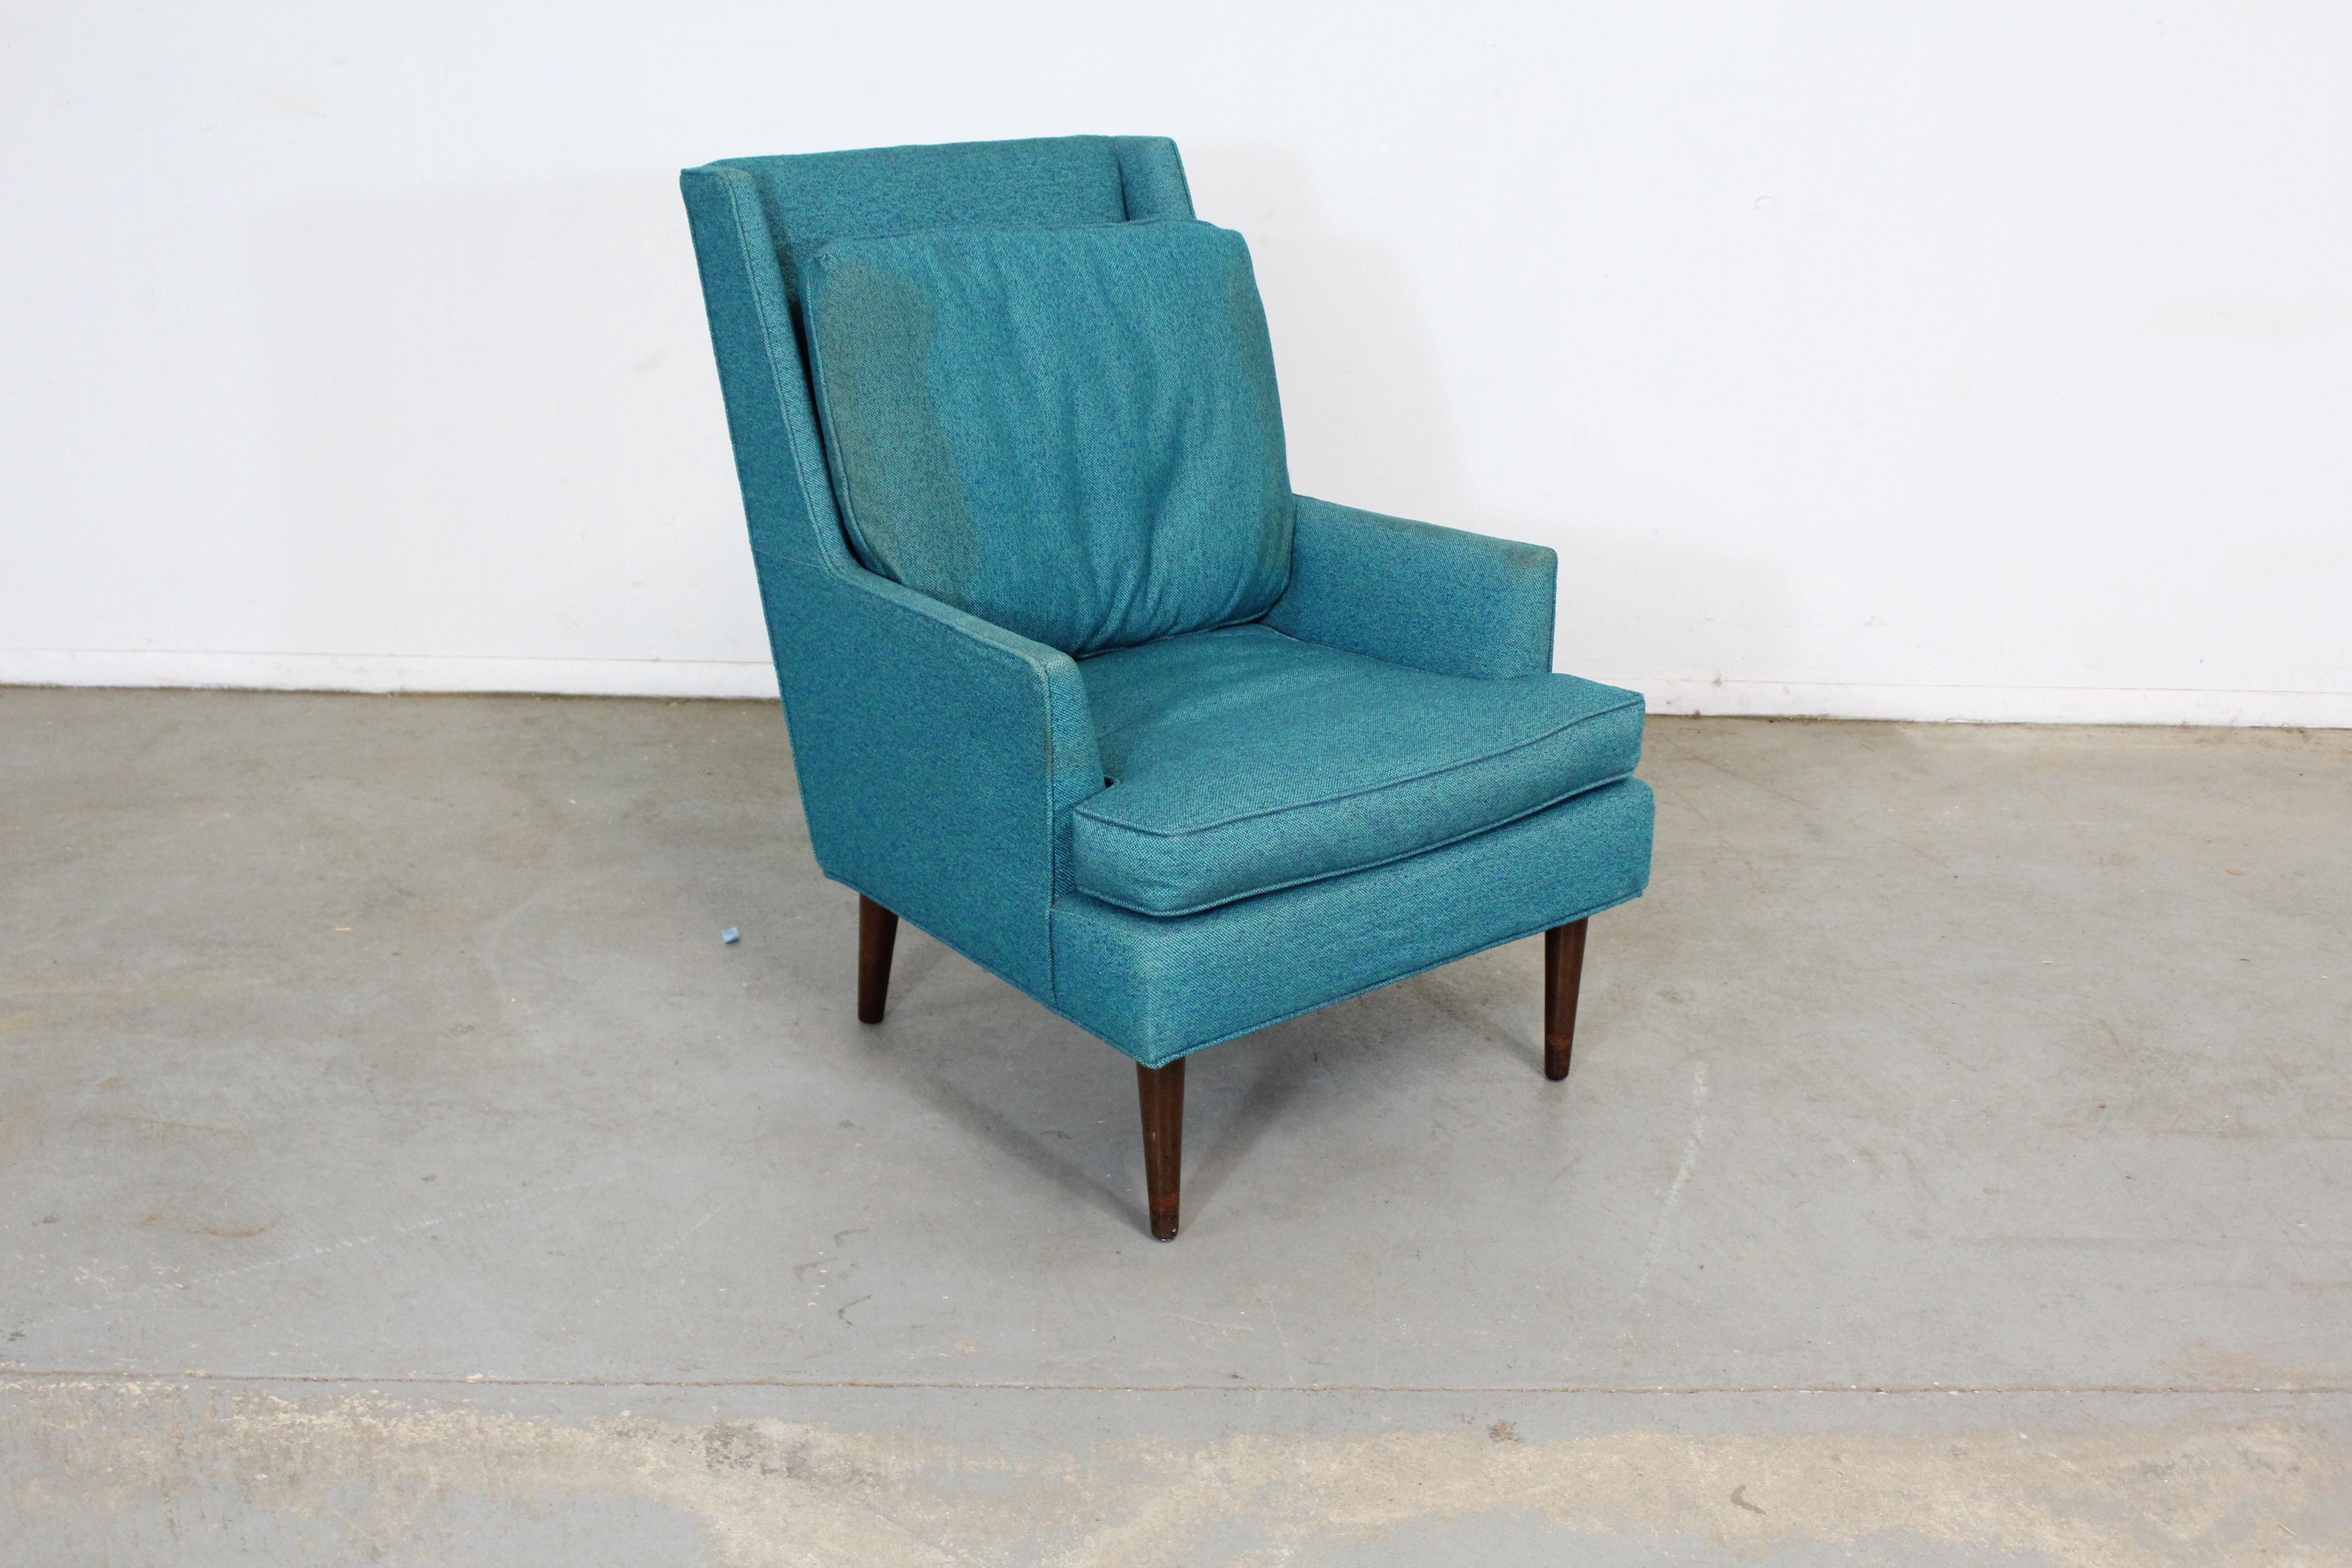 Mid-Century Modern Selig pencil leg lounge chair
Offered is a Mid-Century Modern lounge chair attributed to Selig. This piece is unrestored needs new cushions and upholstery. Showing age wear on the legs. Its tag has been removed by previous owner.